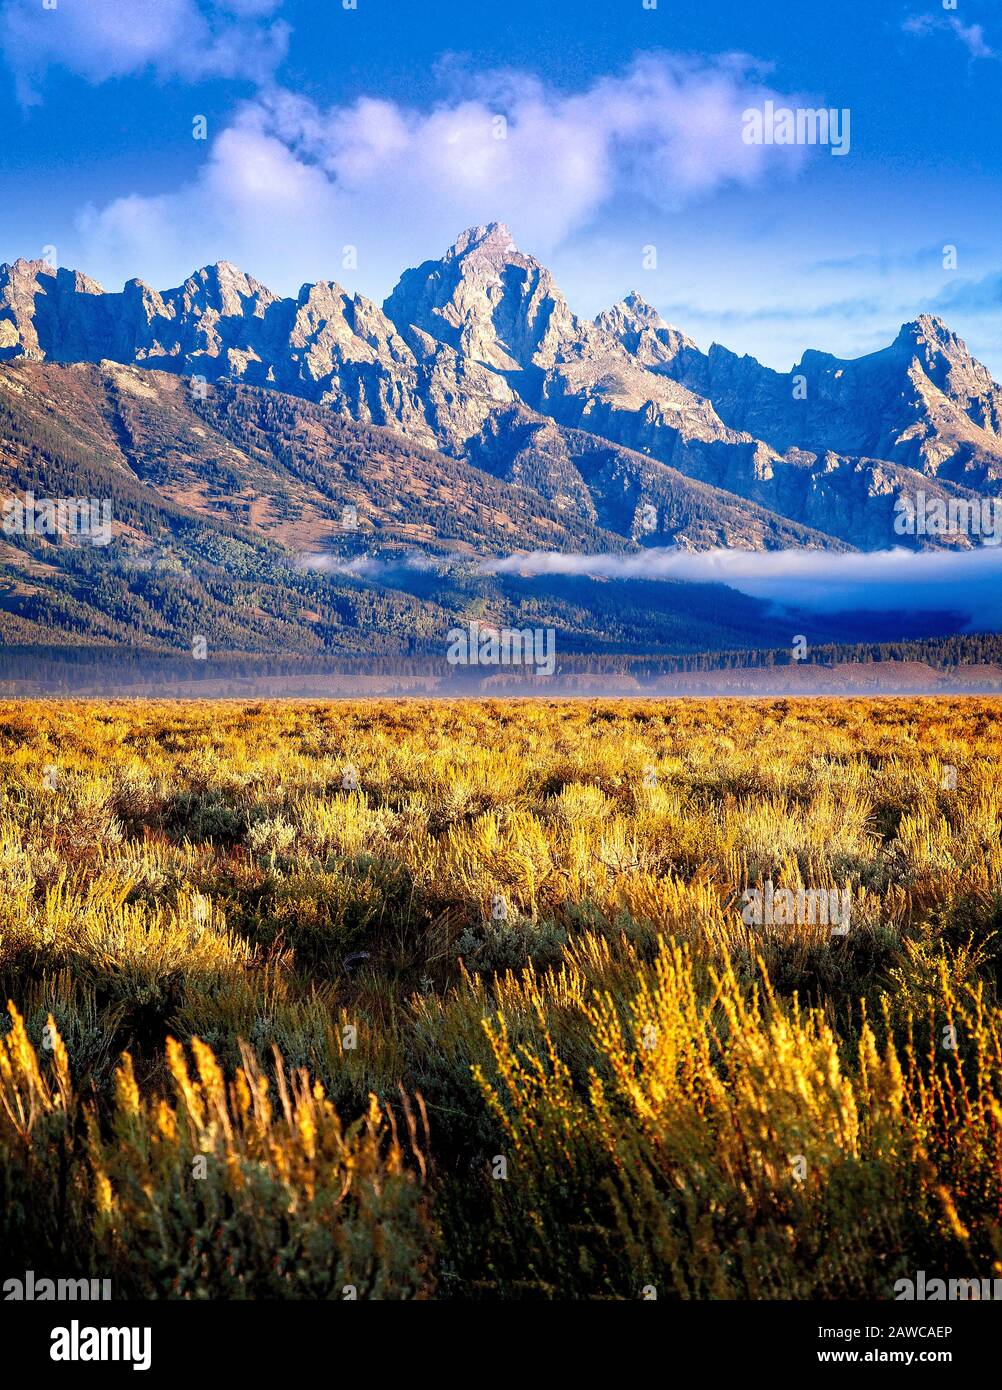 Early morning view of the mountain range at Grand Teton National Park in Wyoming. Stock Photo